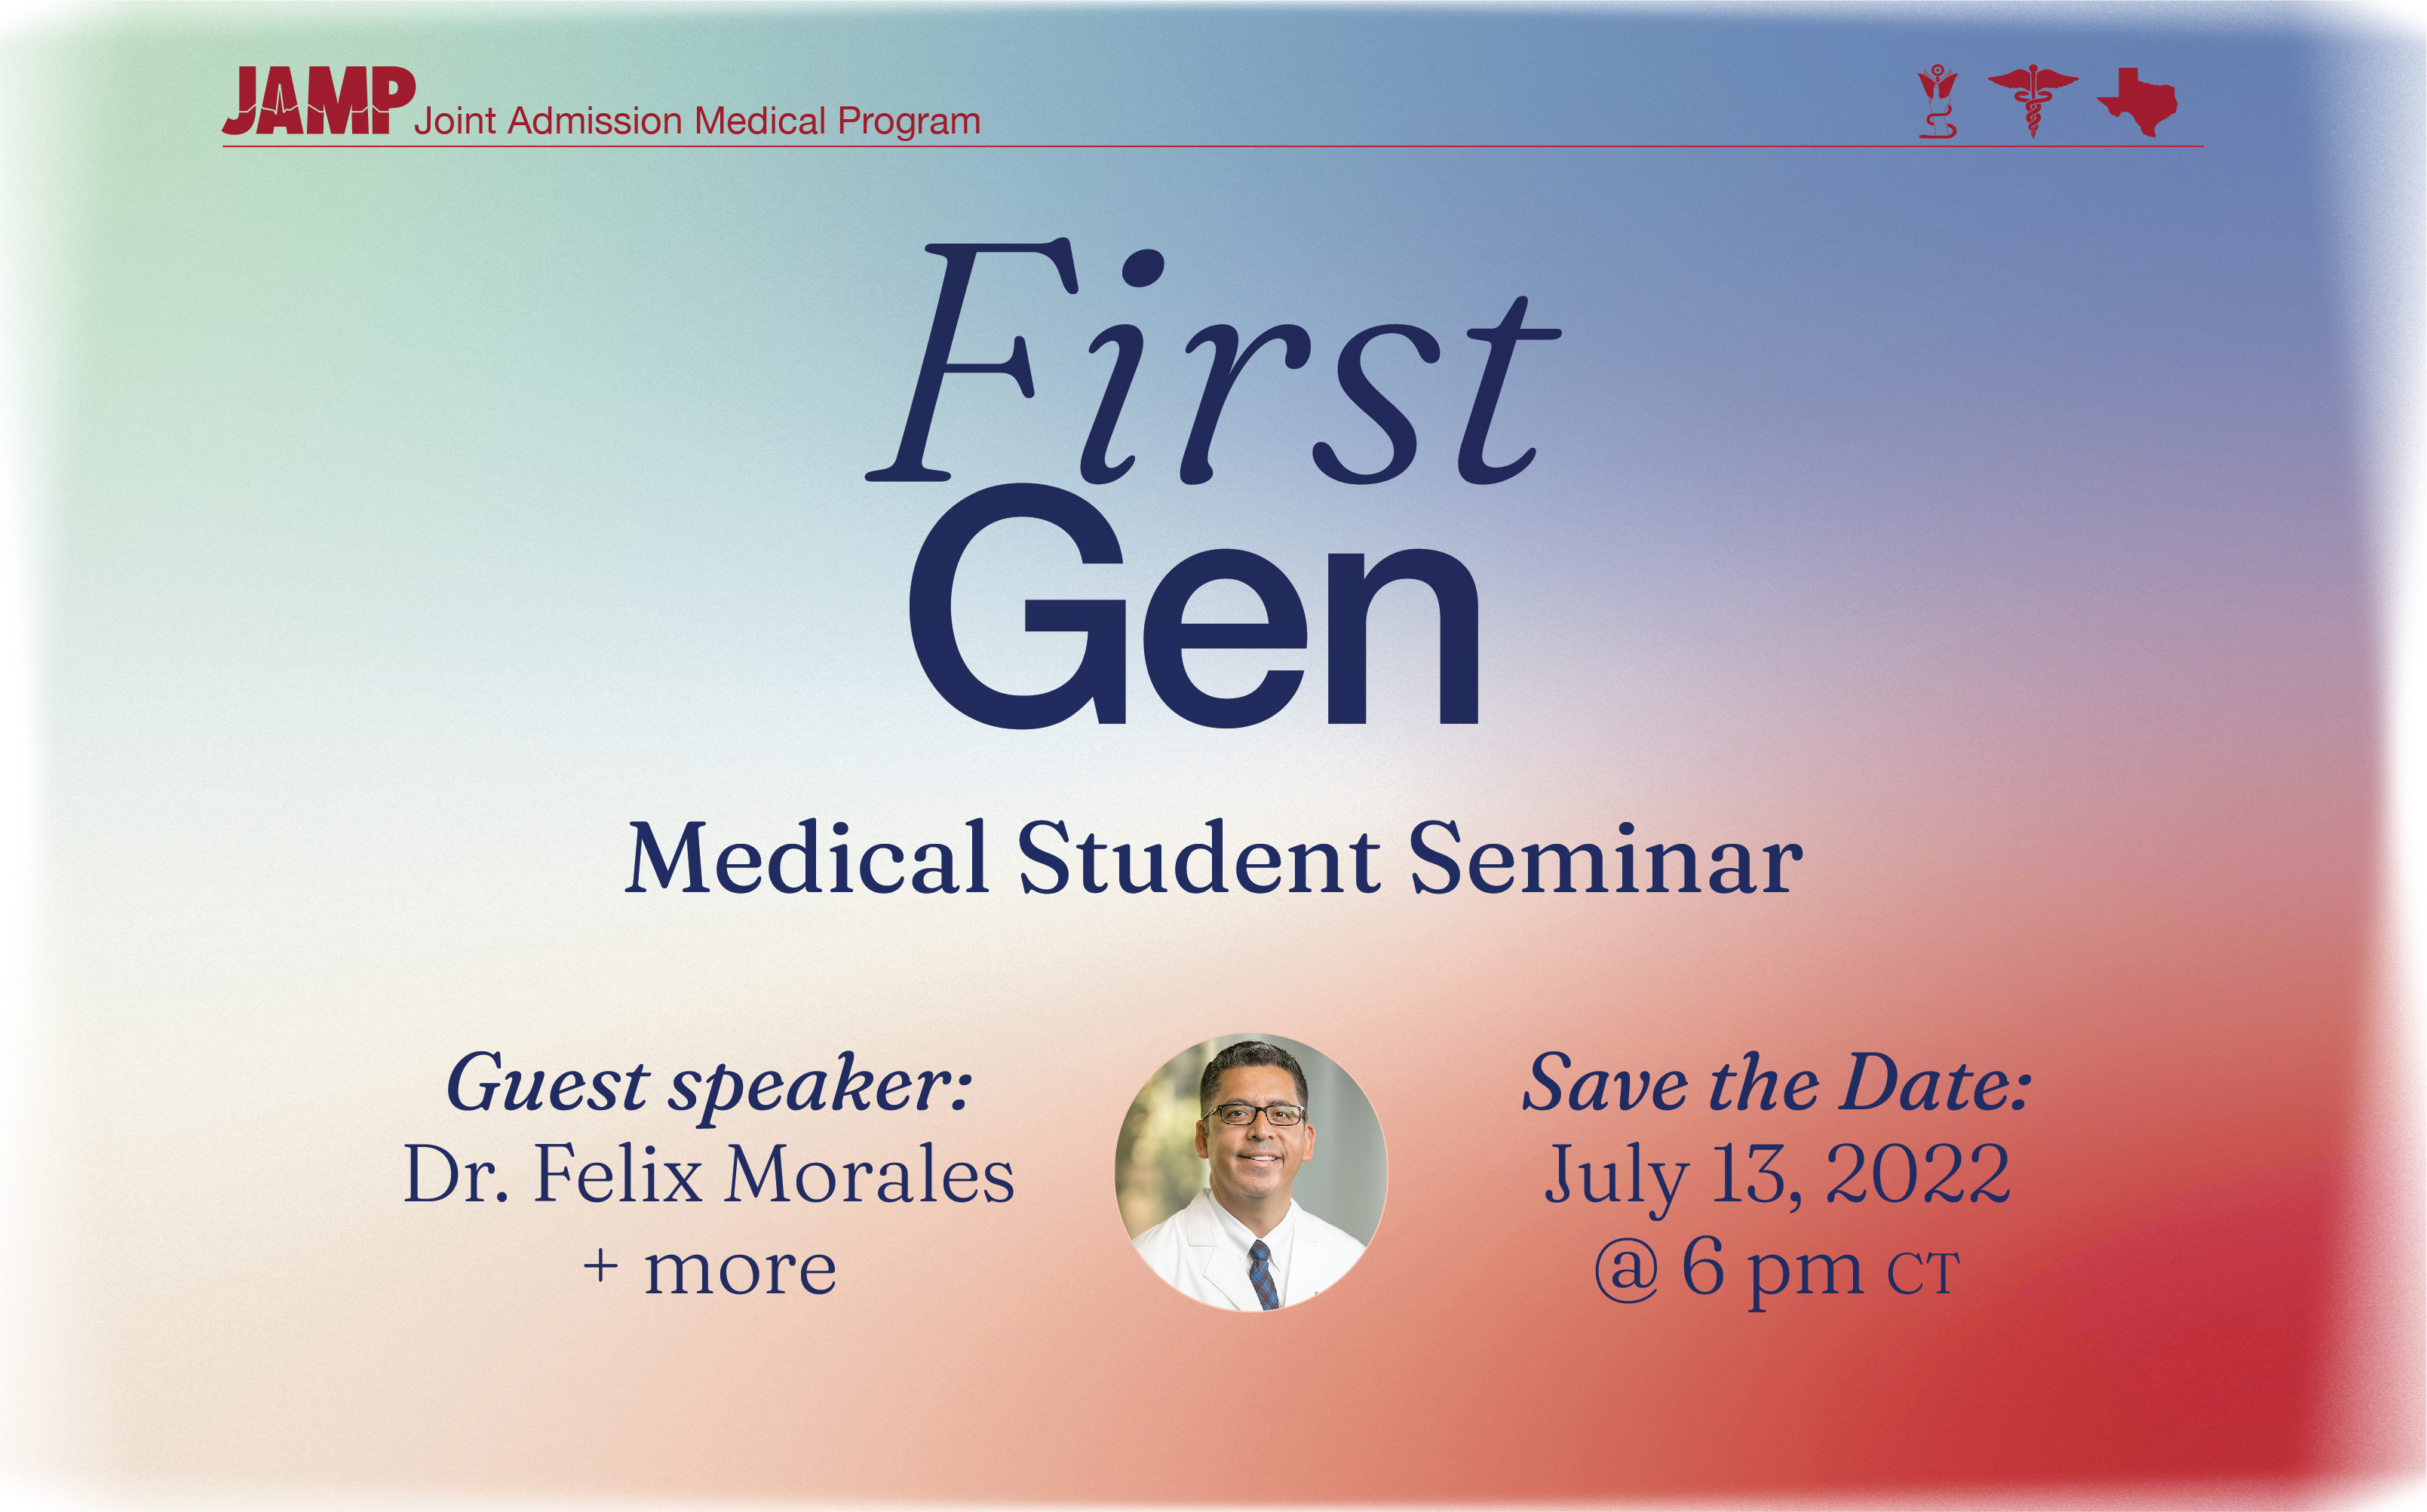 Register for the First Gen Seminar on 7/13 at 6pm CT